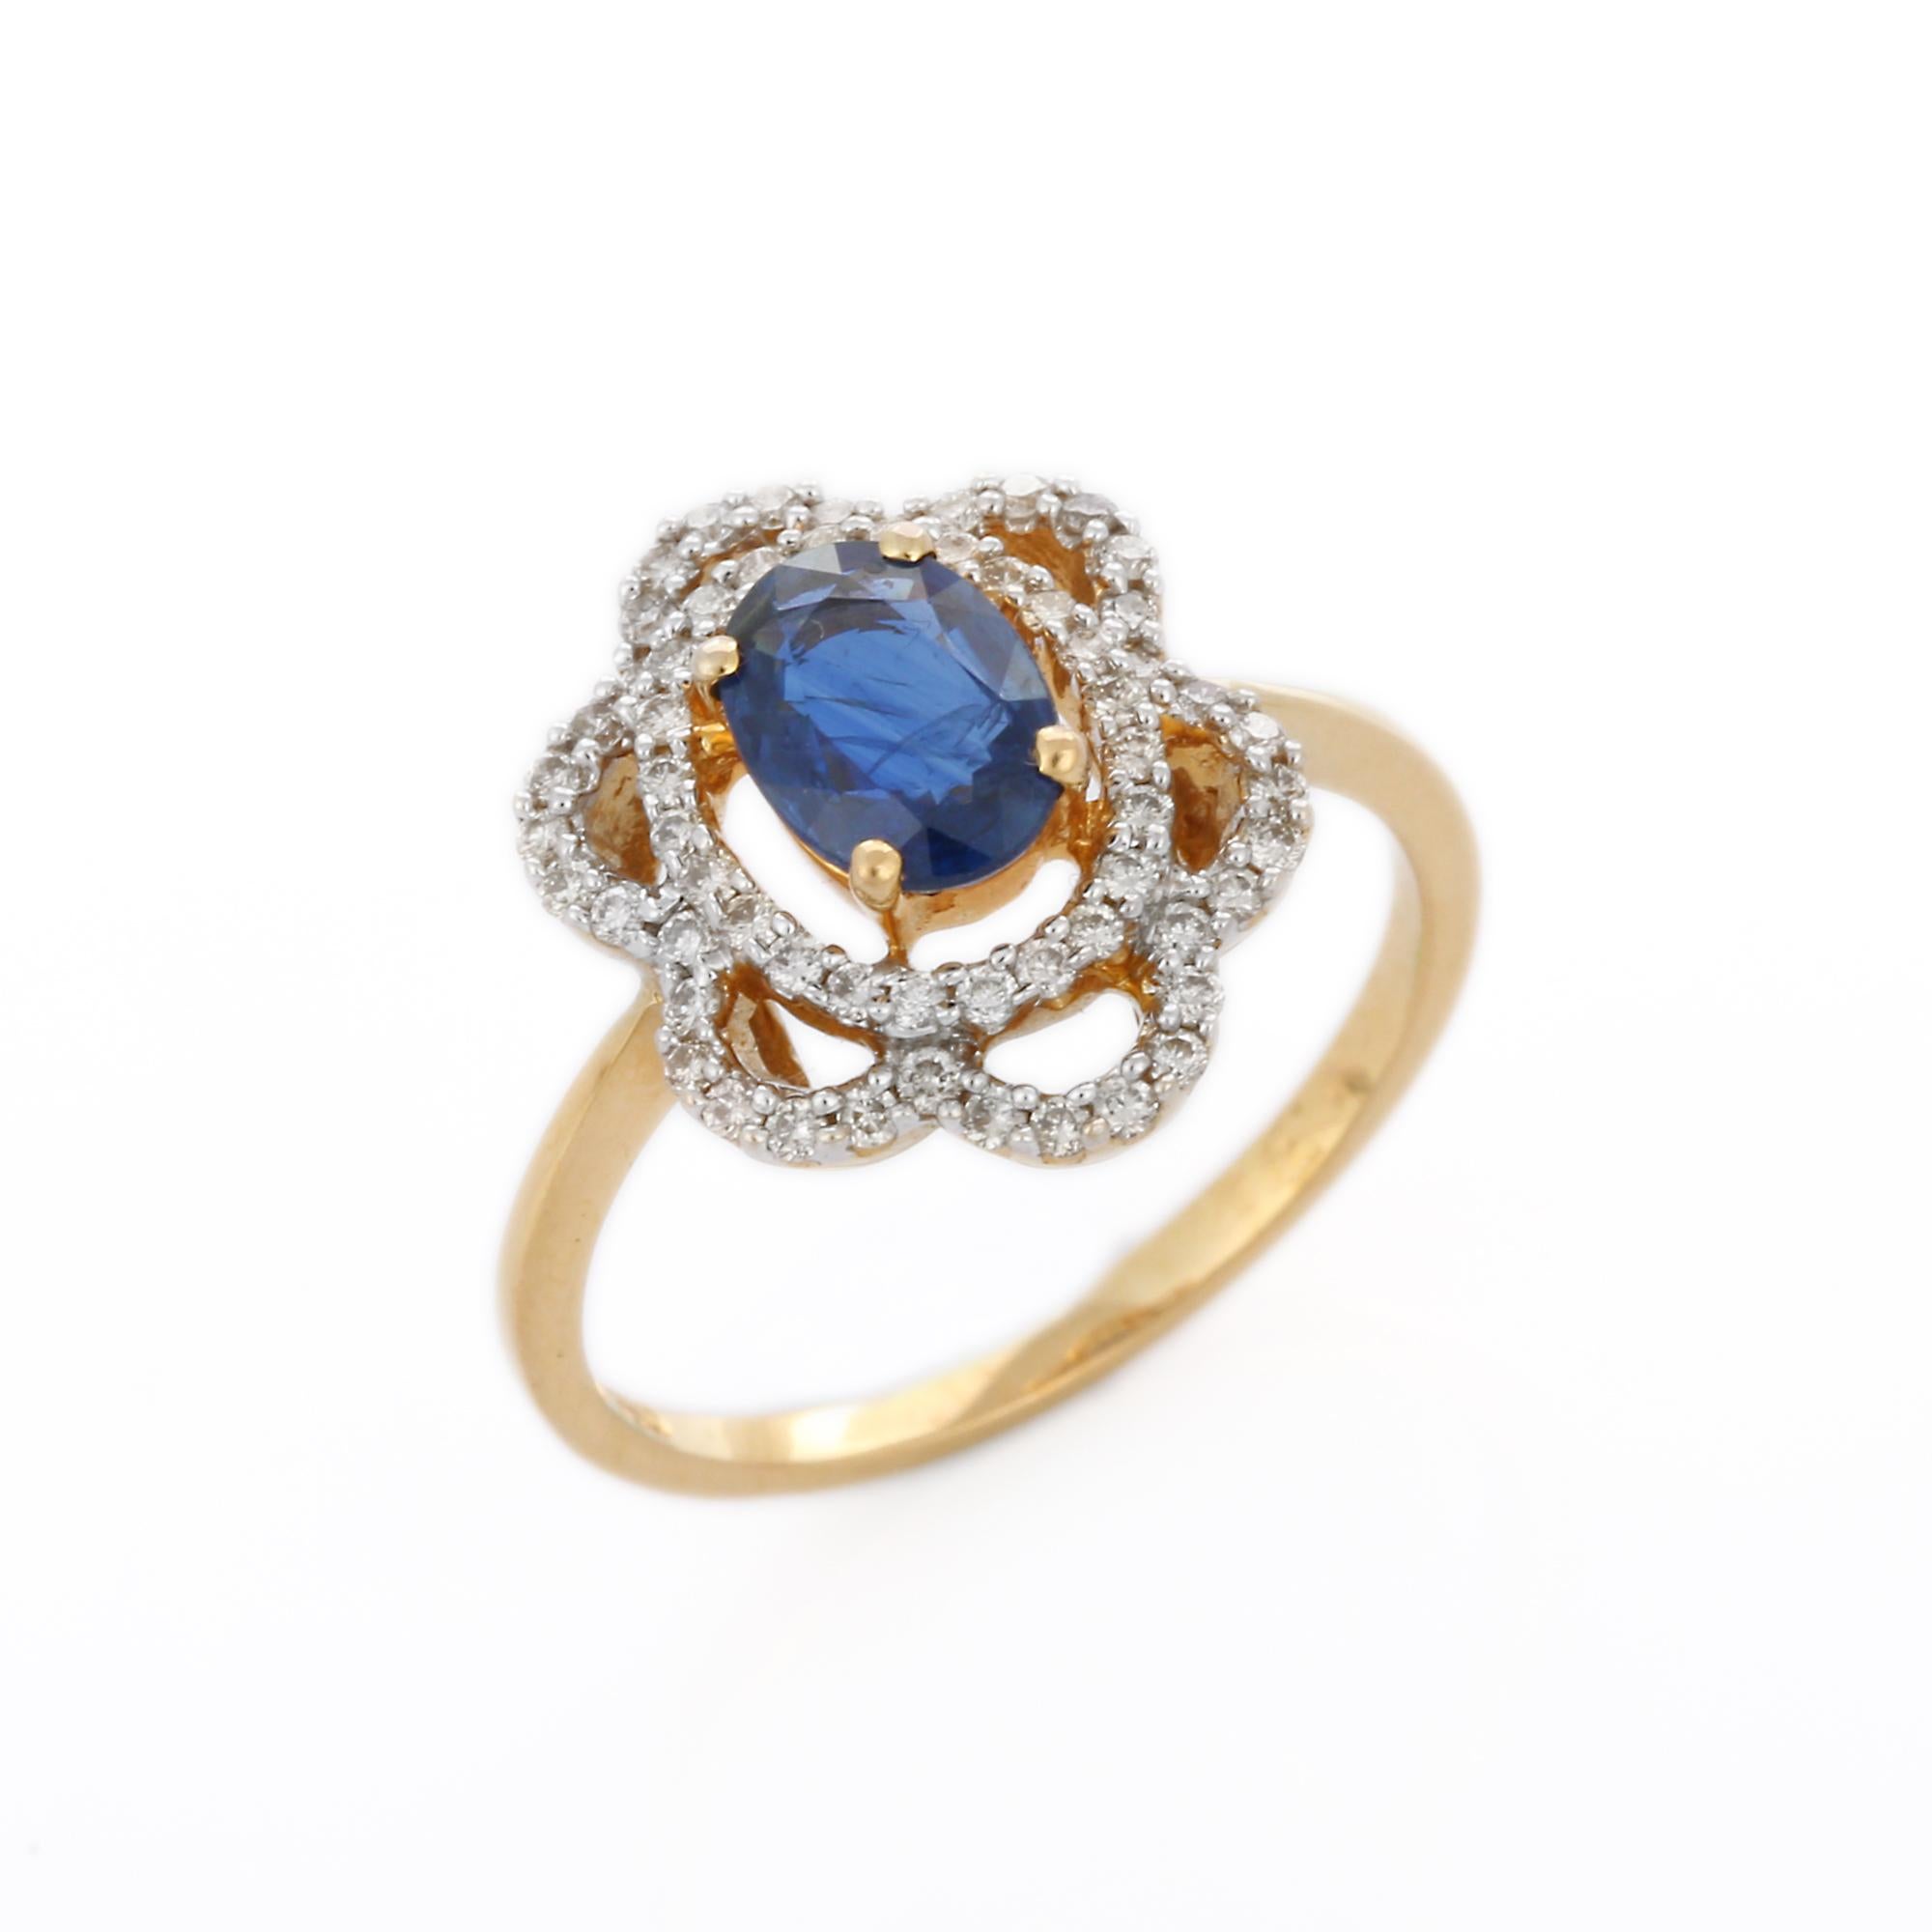 For Sale:  1.01 Ct Oval Blue Sapphire and Diamond Flower Wedding Ring in 18K Yellow Gold 5